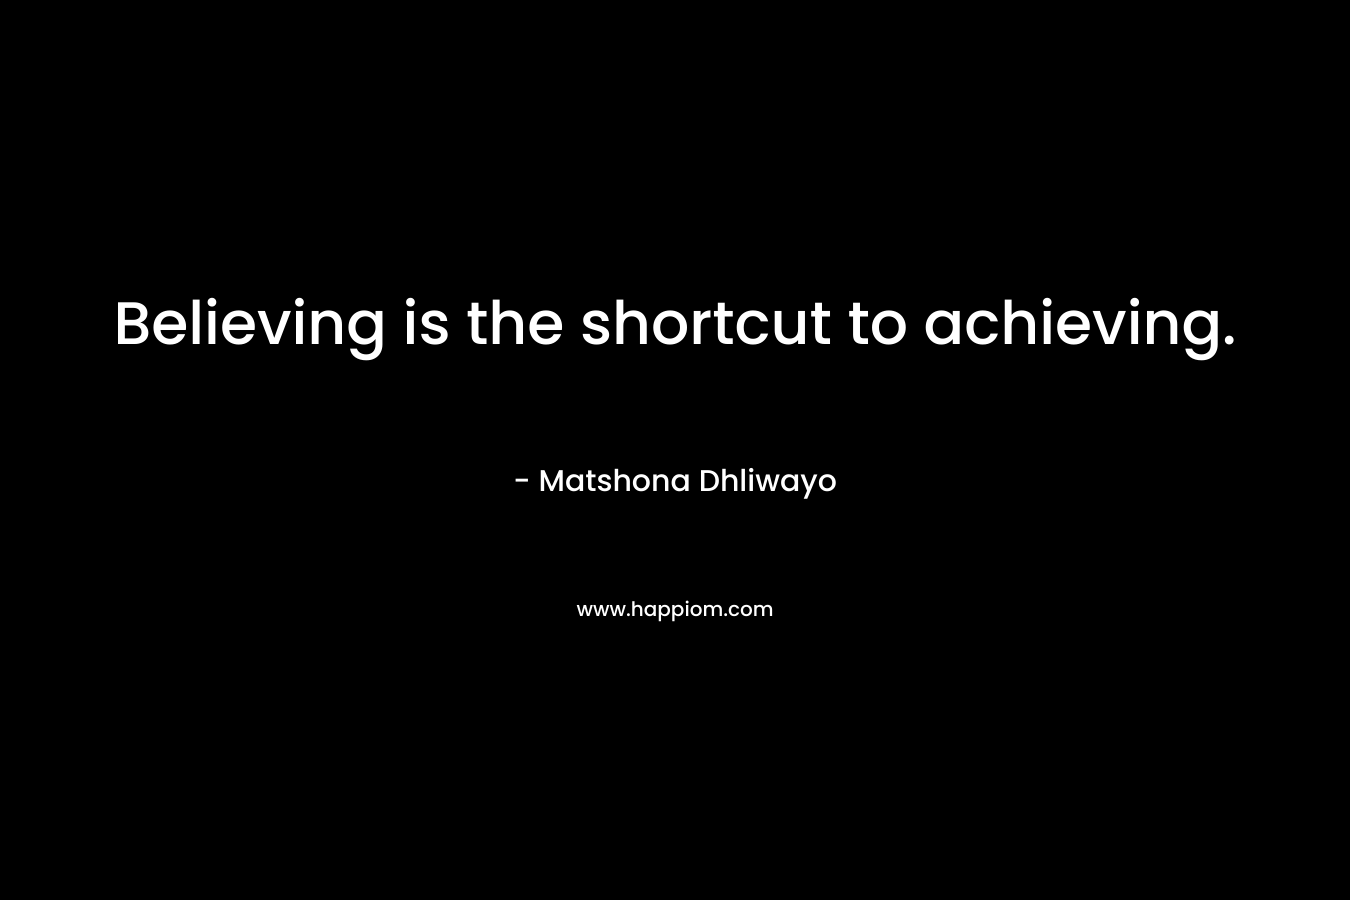 Believing is the shortcut to achieving. – Matshona Dhliwayo